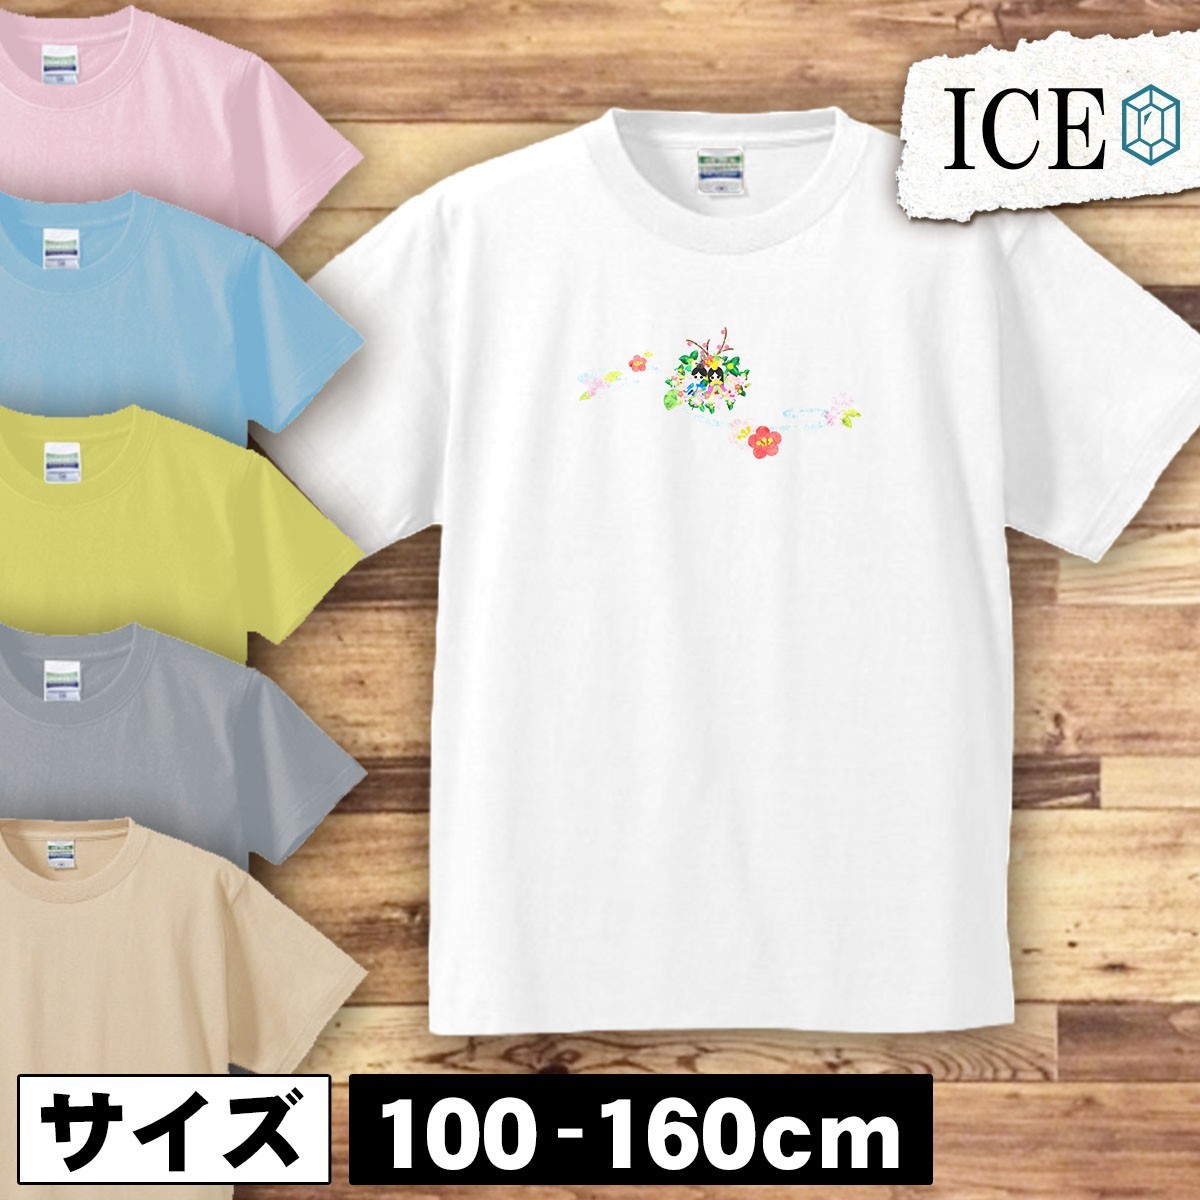 March Kids Short Sleeve T-Shirt March 3rd Hina Dolls Floating on the River Boys Girls Print Cotton Funny Loose Top, tops, short sleeve t-shirt, 130(125~134cm)